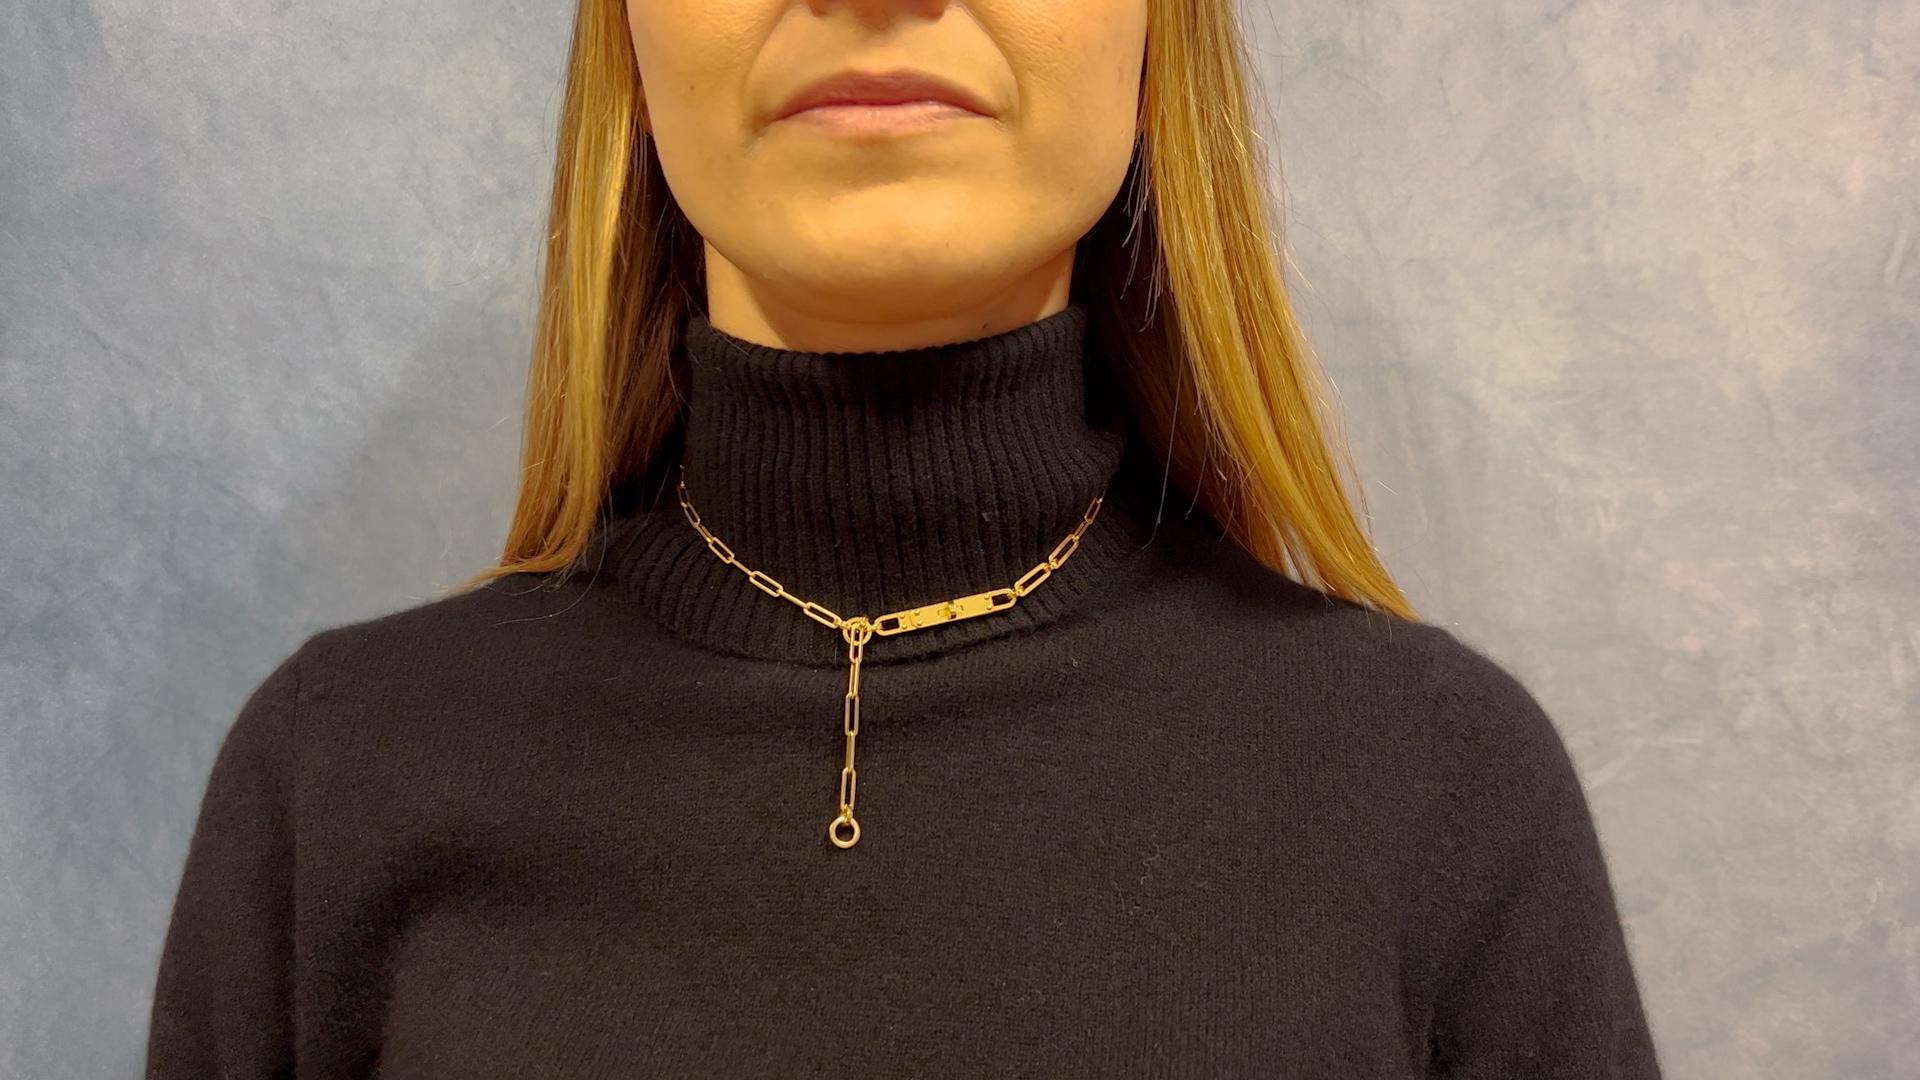 One Hermes French 18k Yellow Gold Kelly Chaine Lariat Necklace. Crafted in 18 karat yellow gold signed Hermes, serial #22AE156074 with French hallmarks, weighing 22.20 grams. Original box included. Circa 2020. The necklace is 16 ½ inches in length